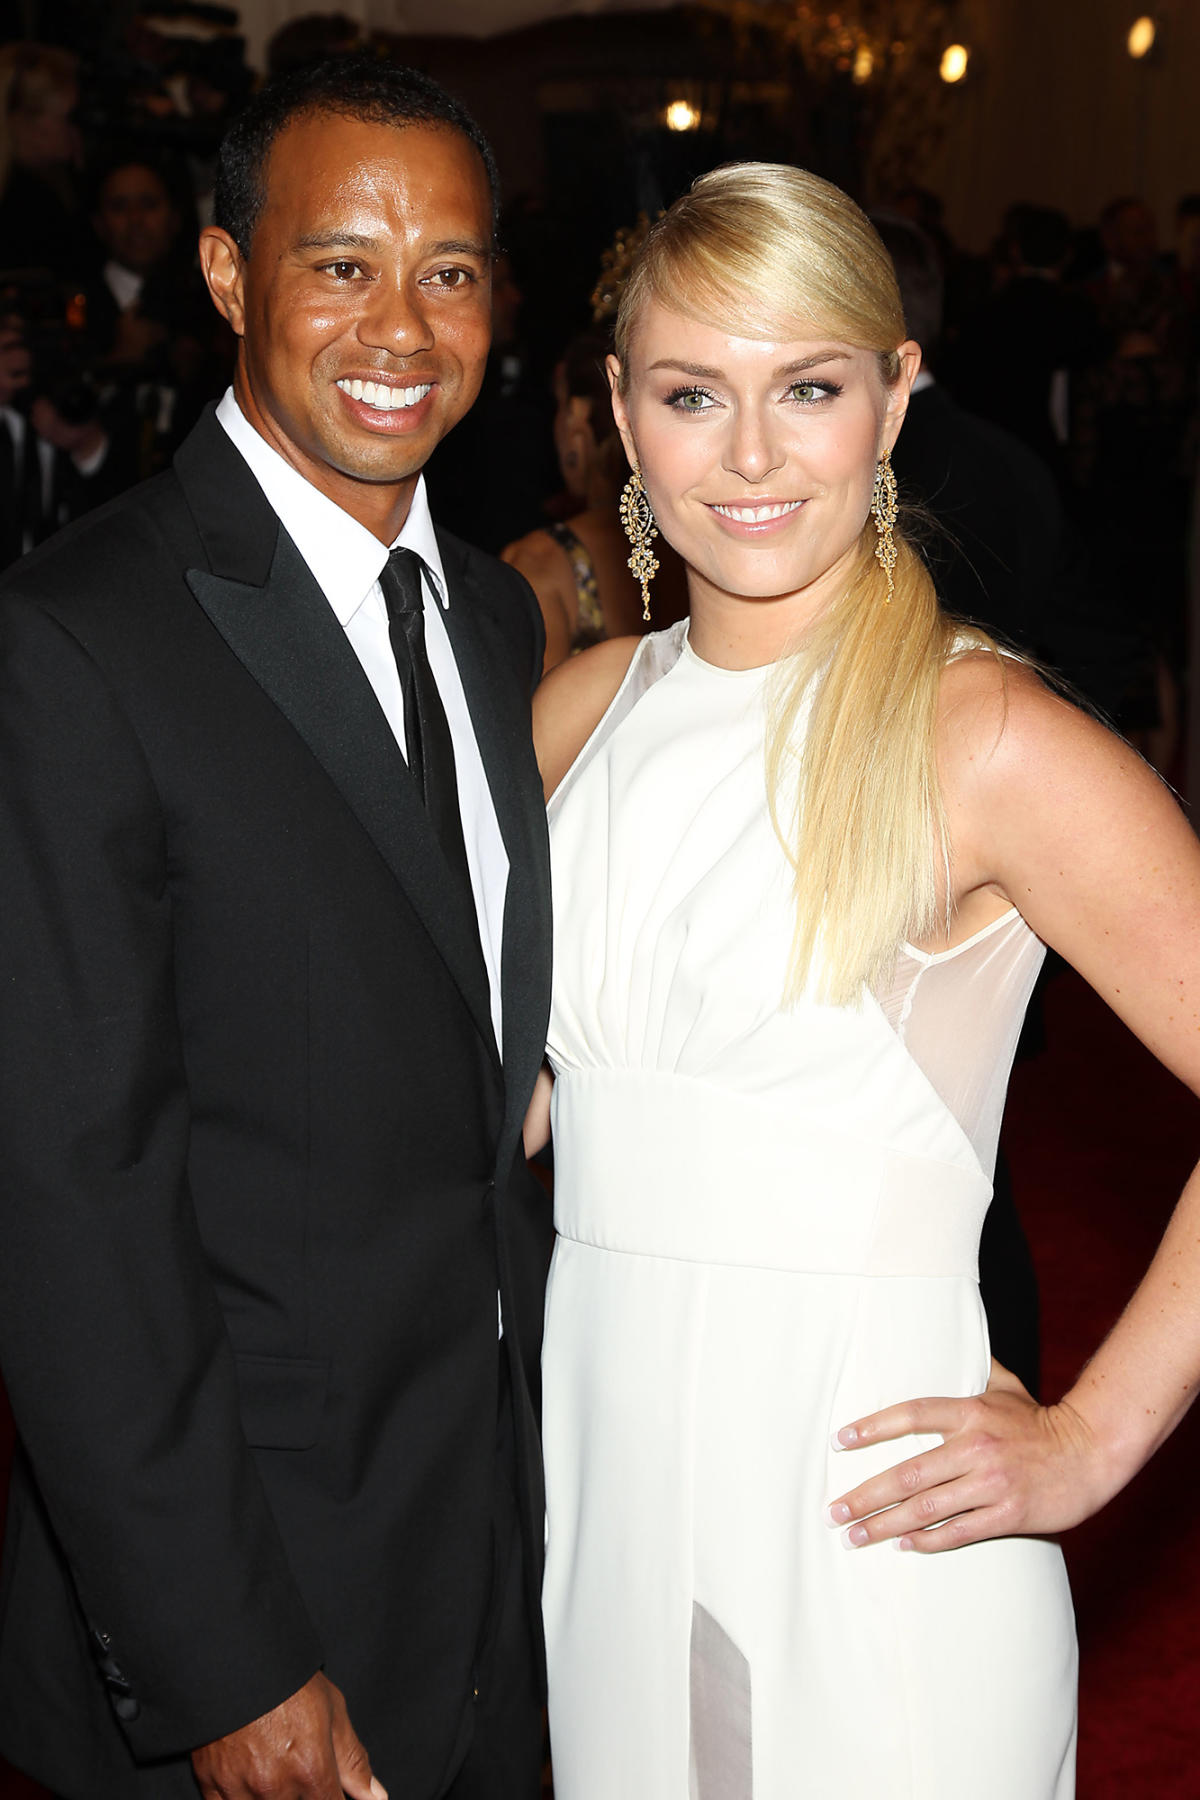 Tiger Woods’ Dating History The Golfer’s Marriage, Mistresses